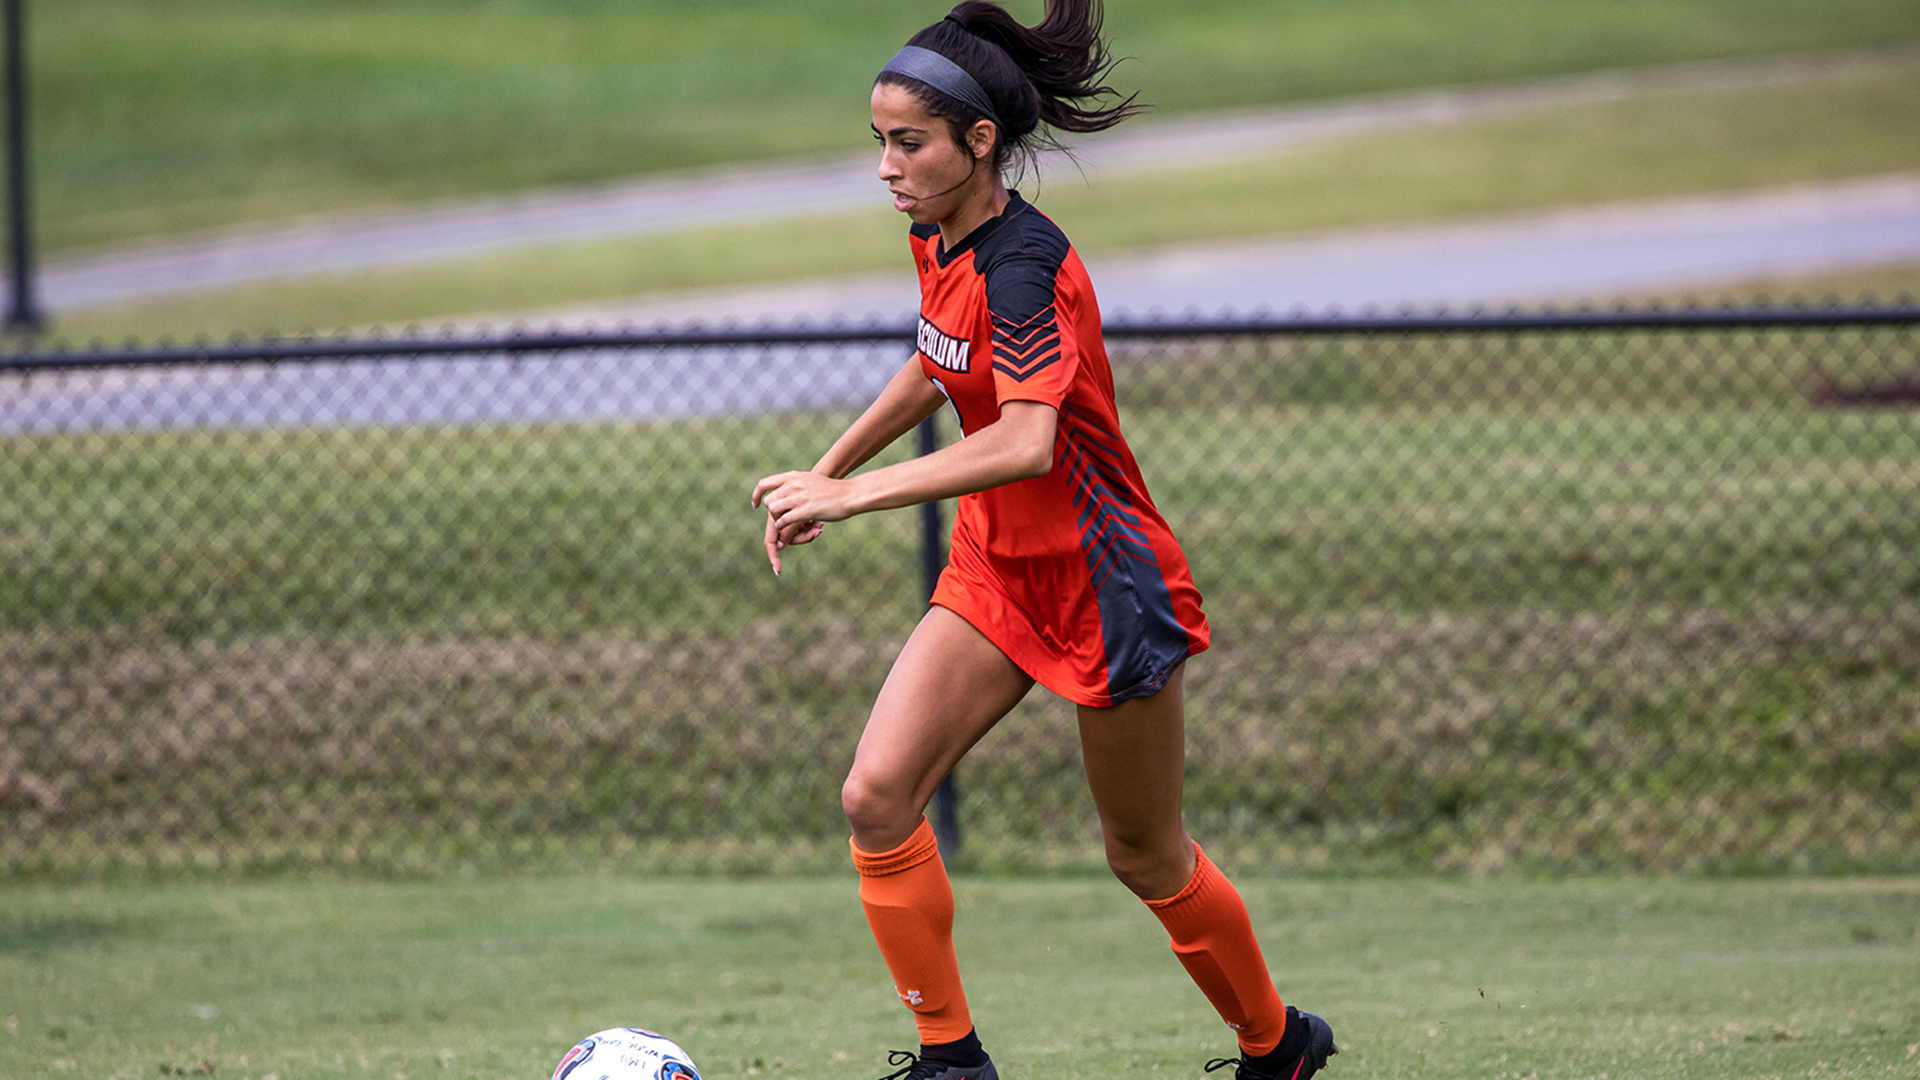 Late goal lifts Carson-Newman to 2-1 win over Pioneers